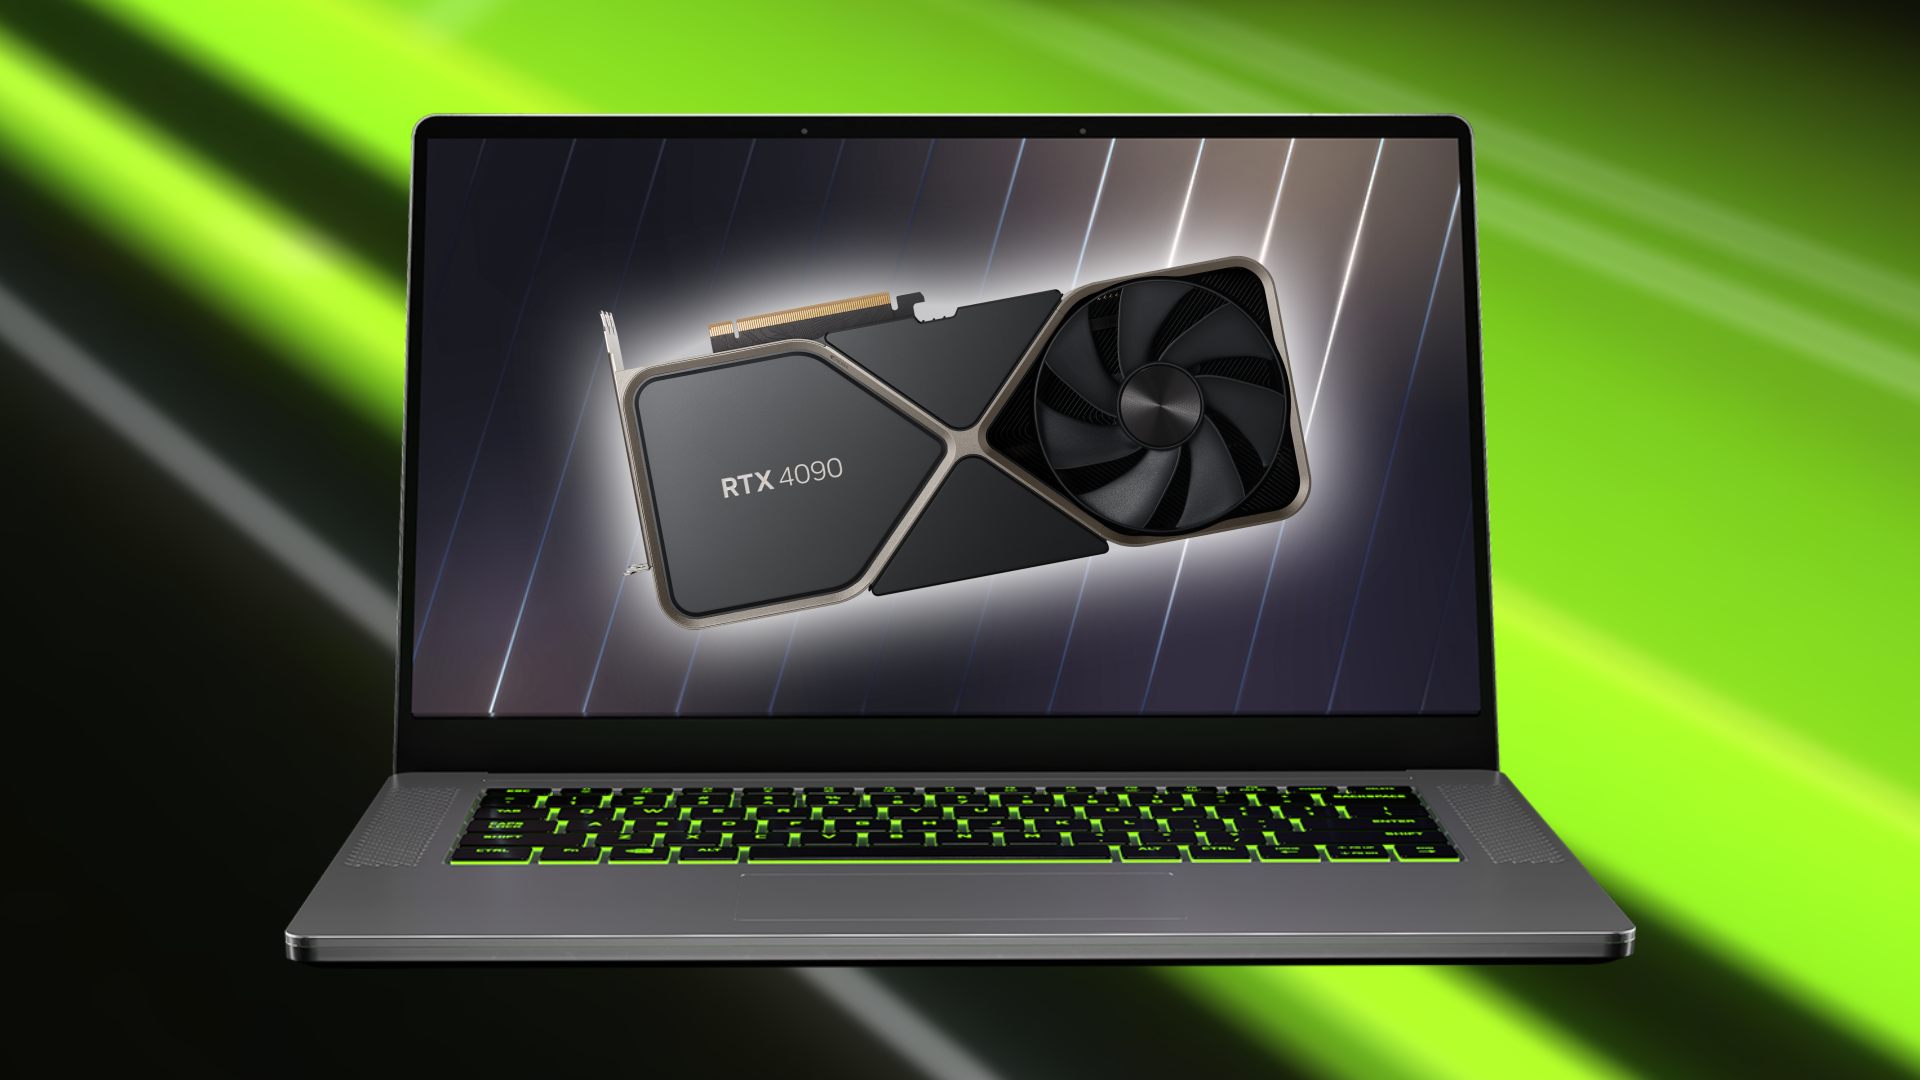 Yes, an Nvidia RTX 4090 gaming laptop GPU is apparently coming